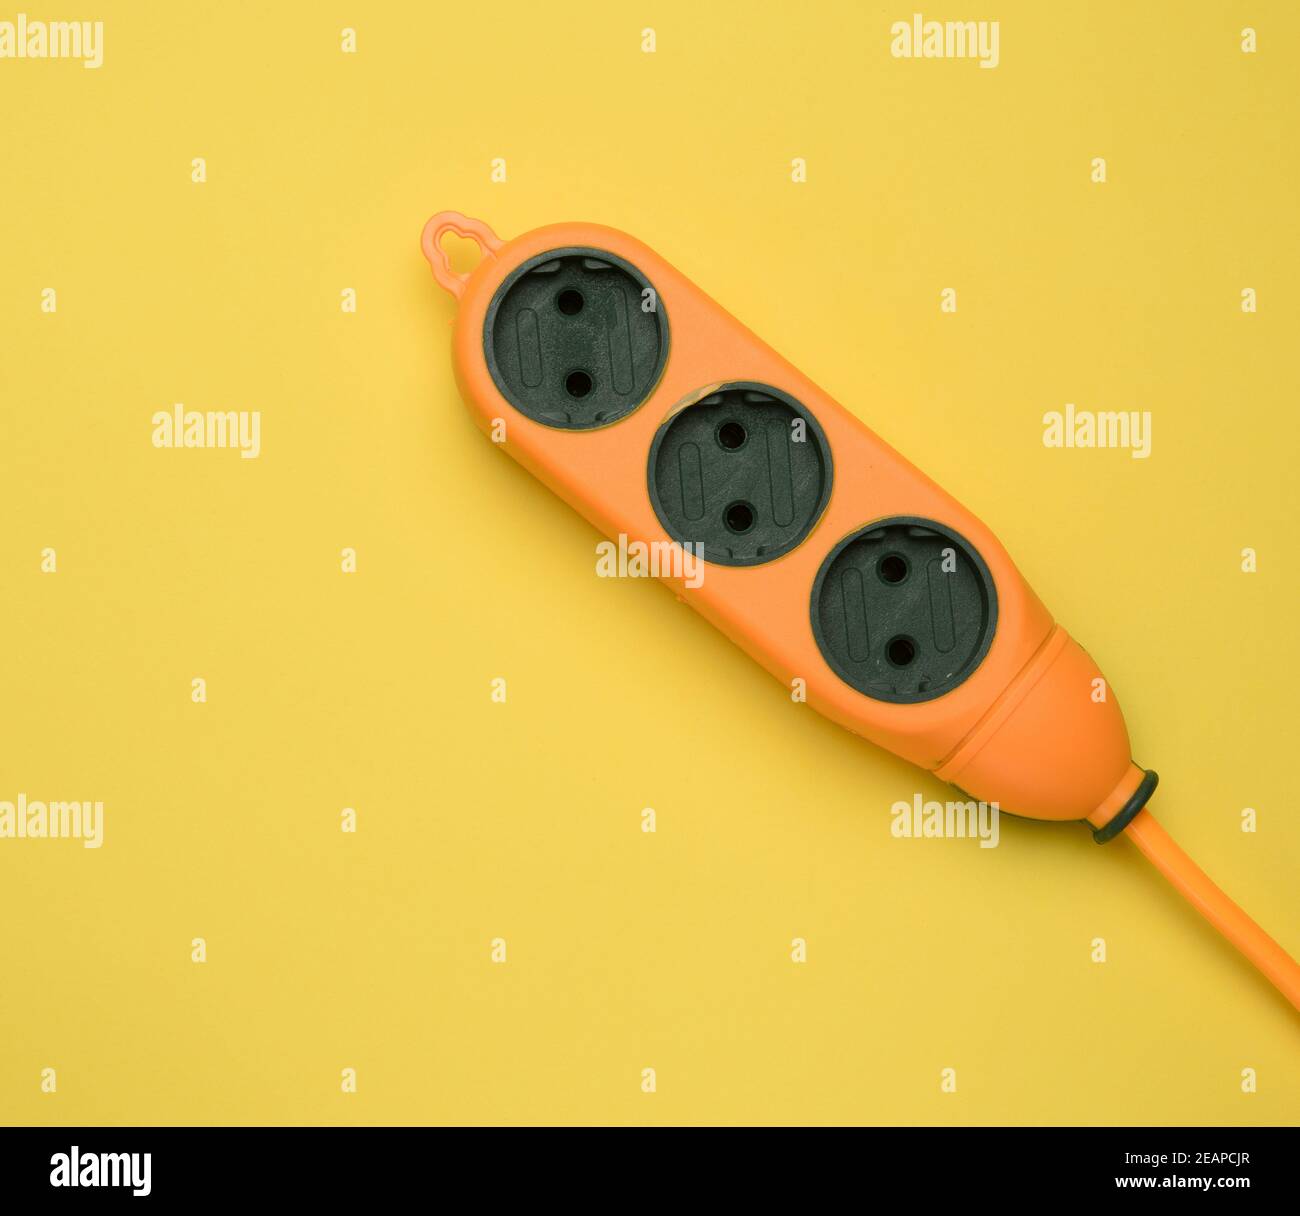 rubber orange power strip with three sockets isolated on a yellow background Stock Photo